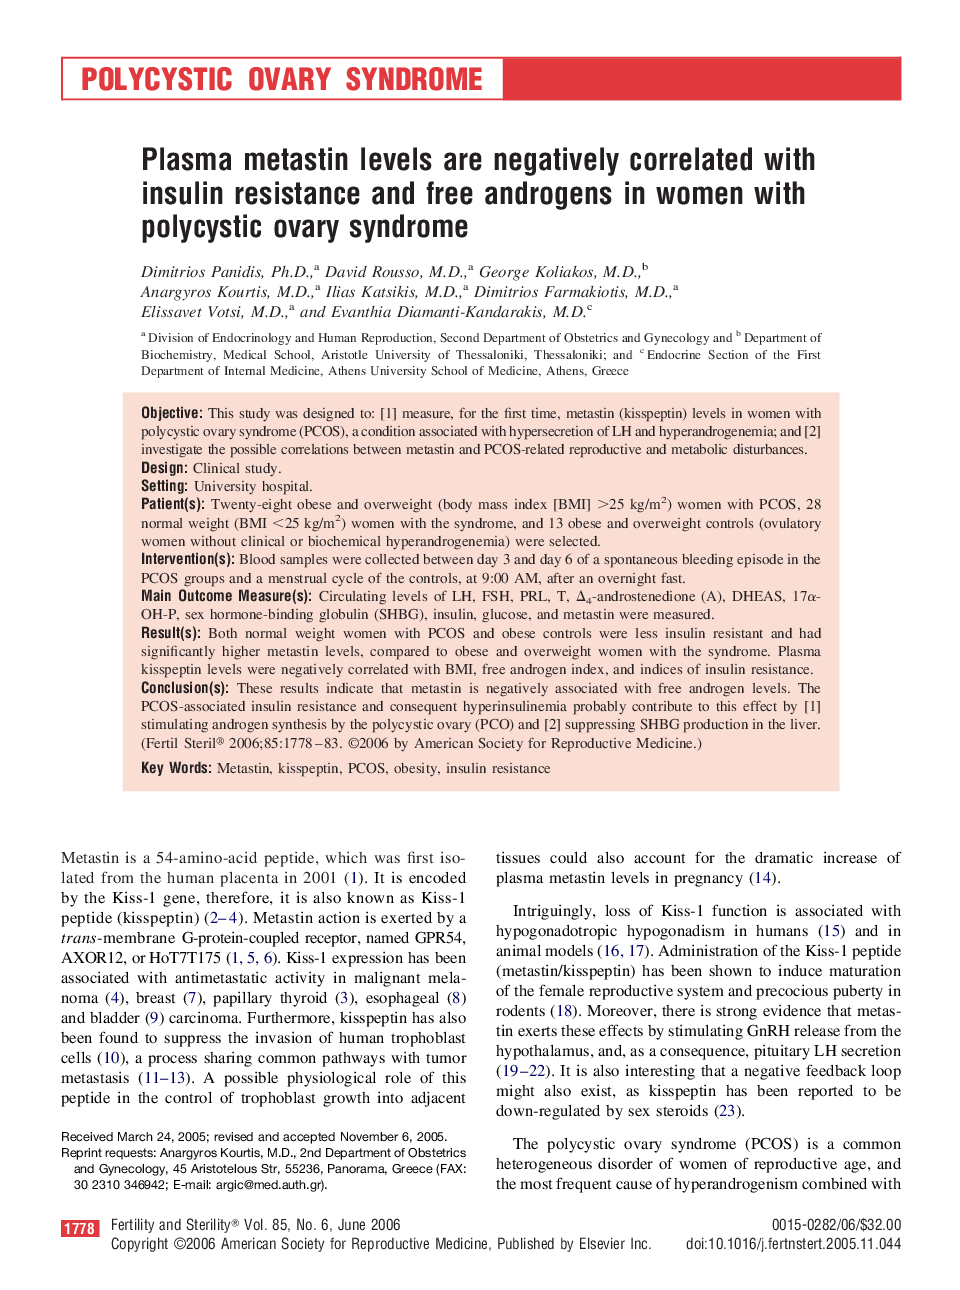 Plasma metastin levels are negatively correlated with insulin resistance and free androgens in women with polycystic ovary syndrome